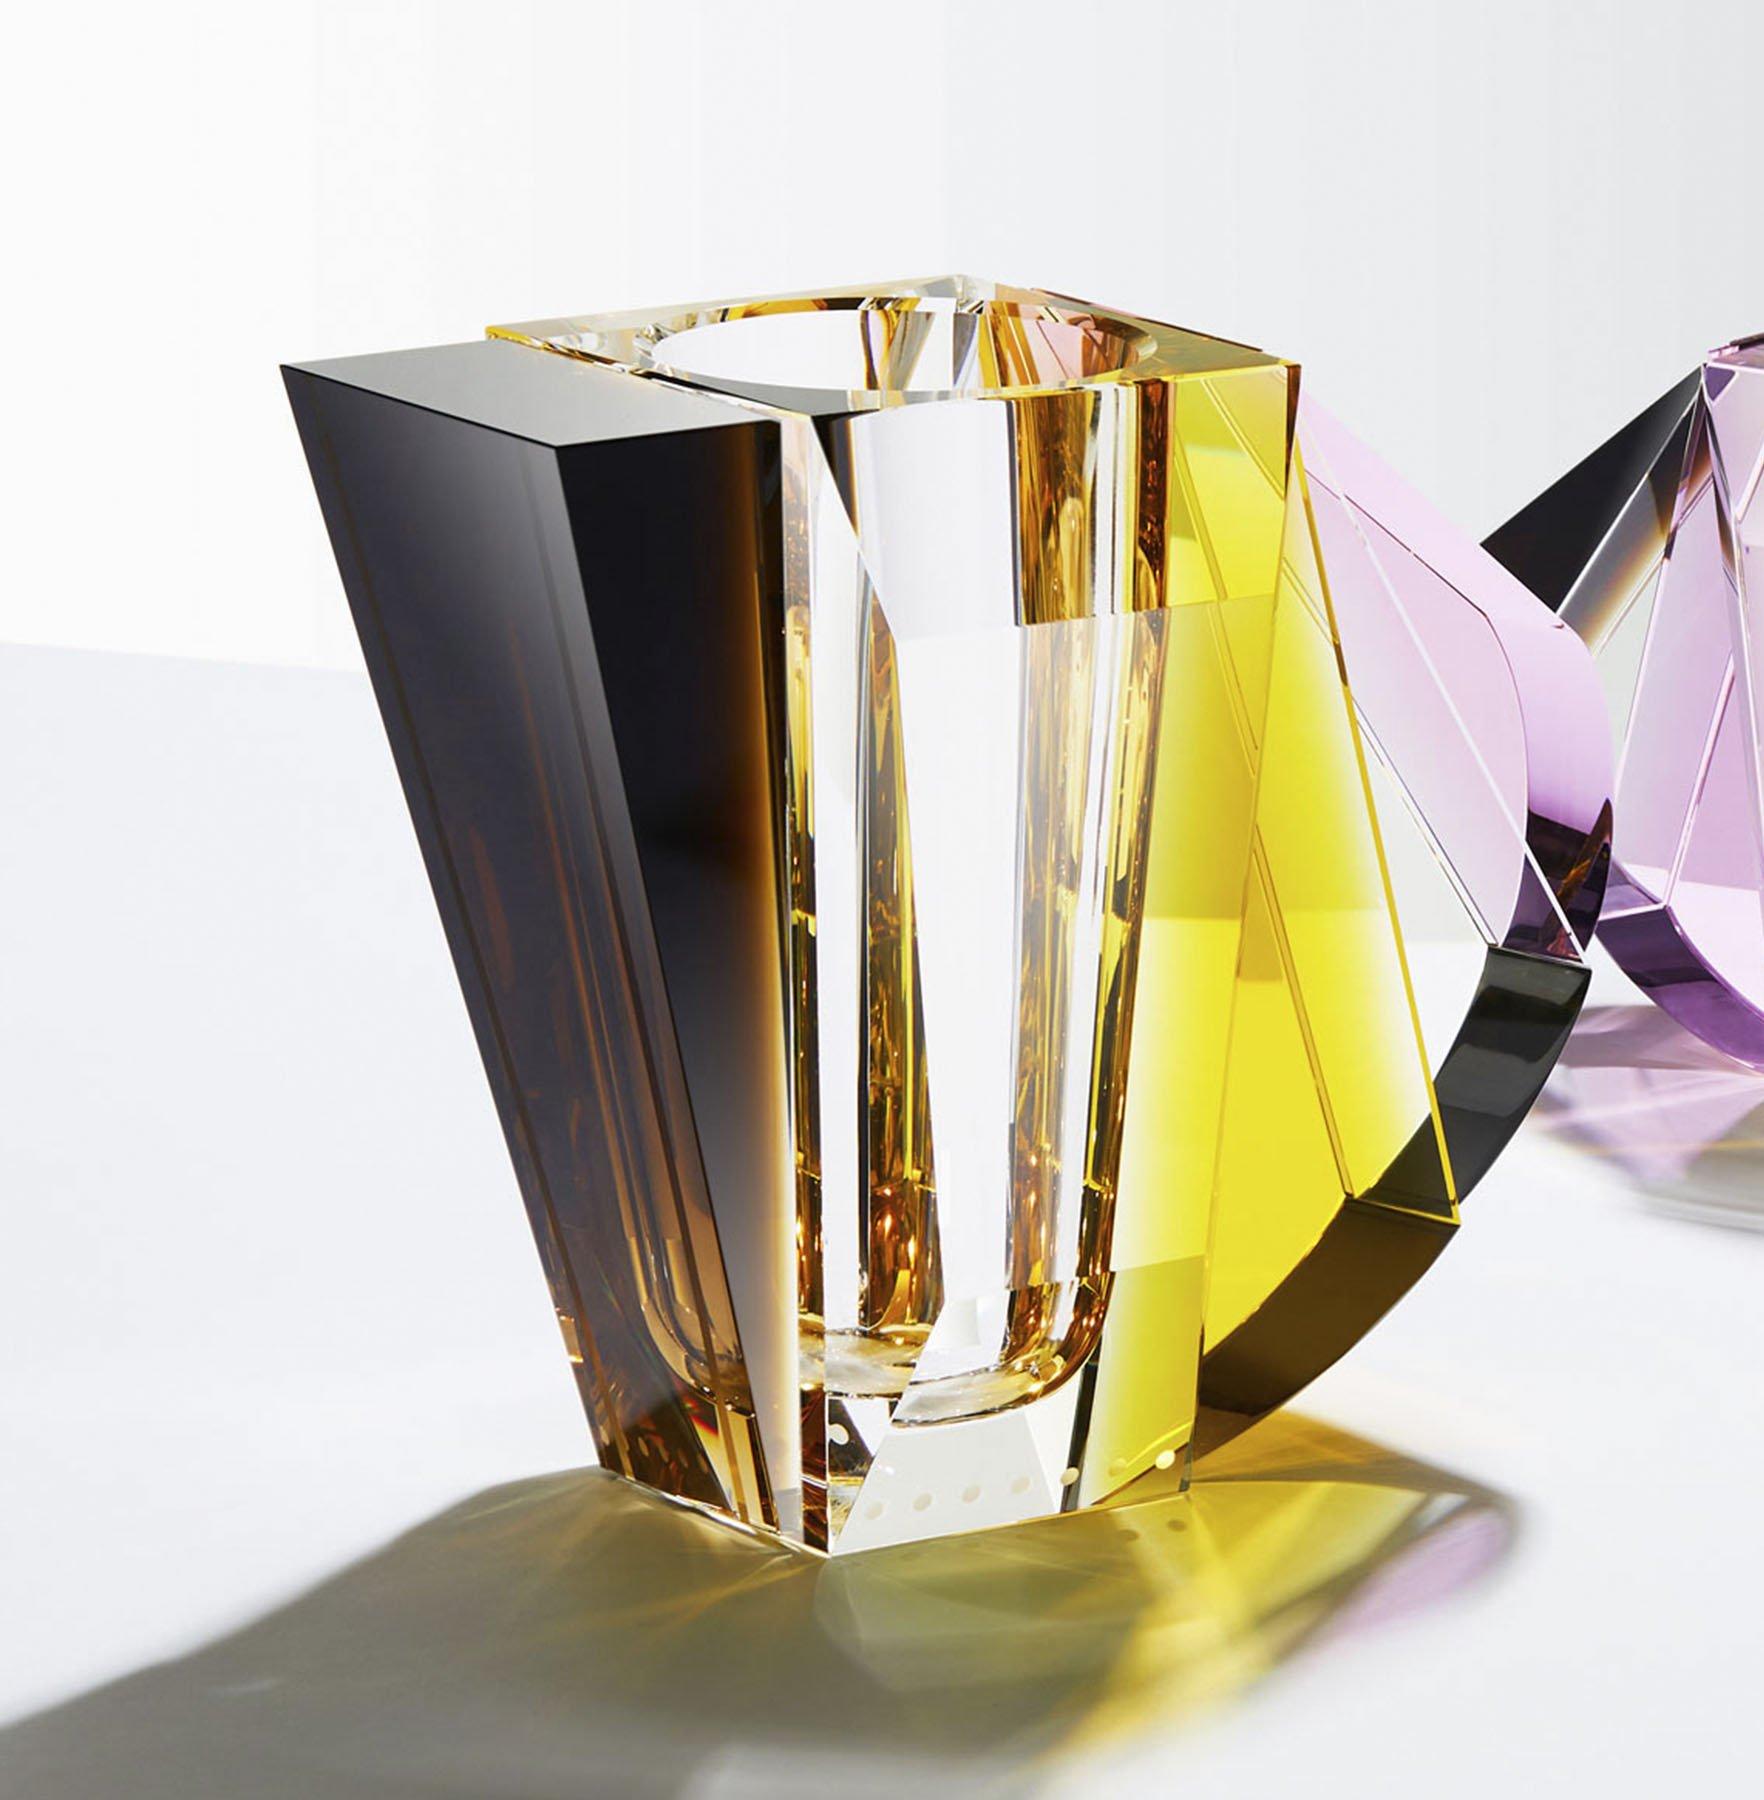 Pair of NYC contemprary vases, hand-sculpted contemporary crystal
Crystal vases
Hand-sculpted in crystal
Large:
Height 25.5 cm
Width 23 cm
Depth 13.5 cm
Weight 8.3 kg
Small
Height 21.5 cm
Width 16 cm
Depth 11 cm
Weight 4.2 kg
Material